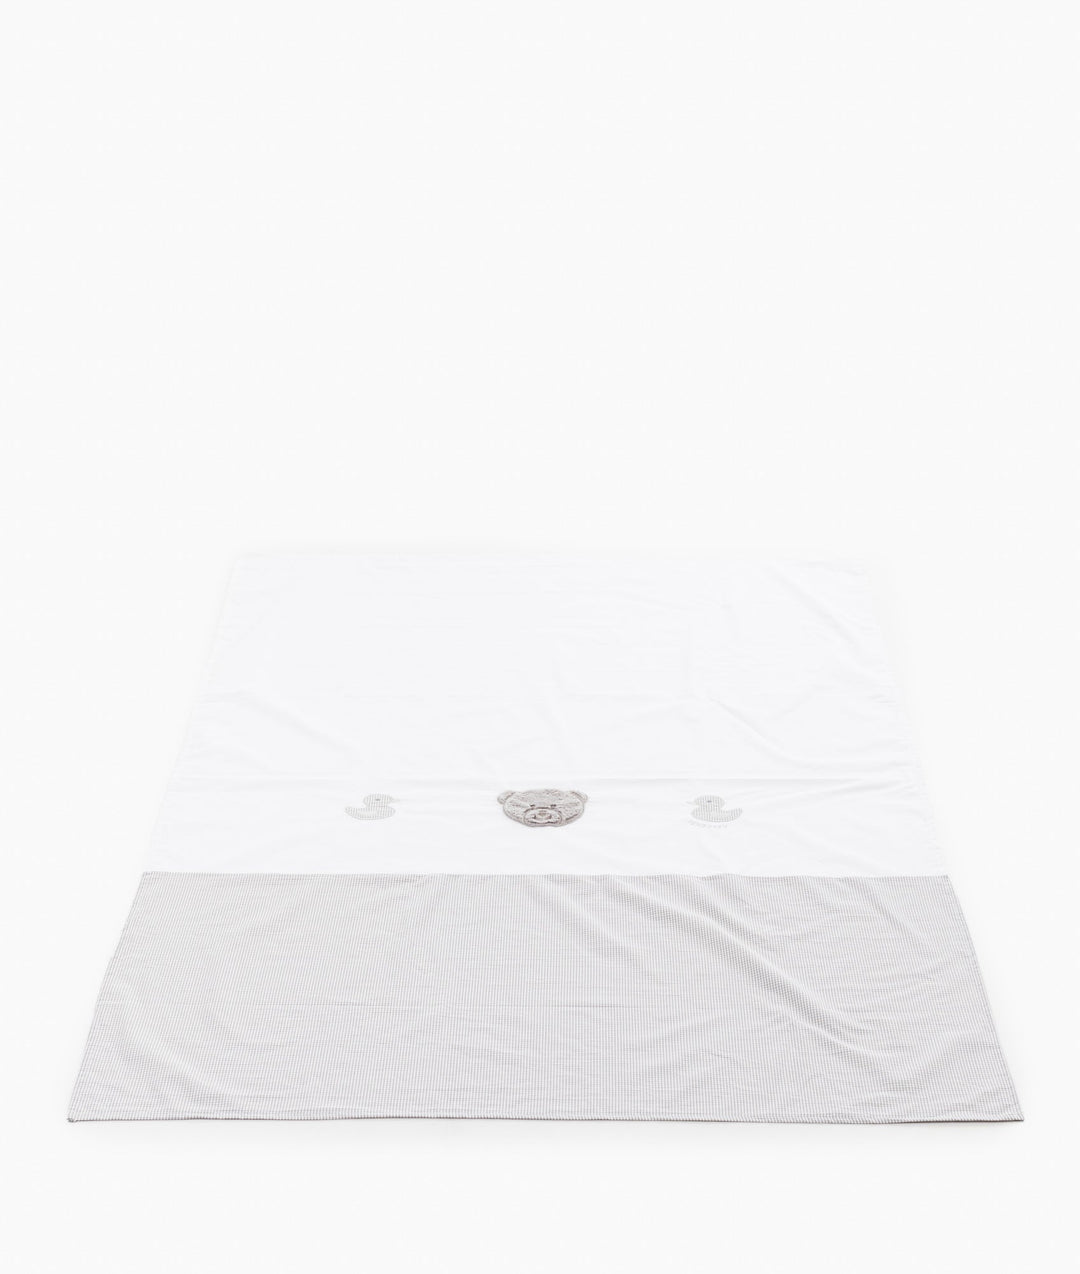 Popo Bed Sheet